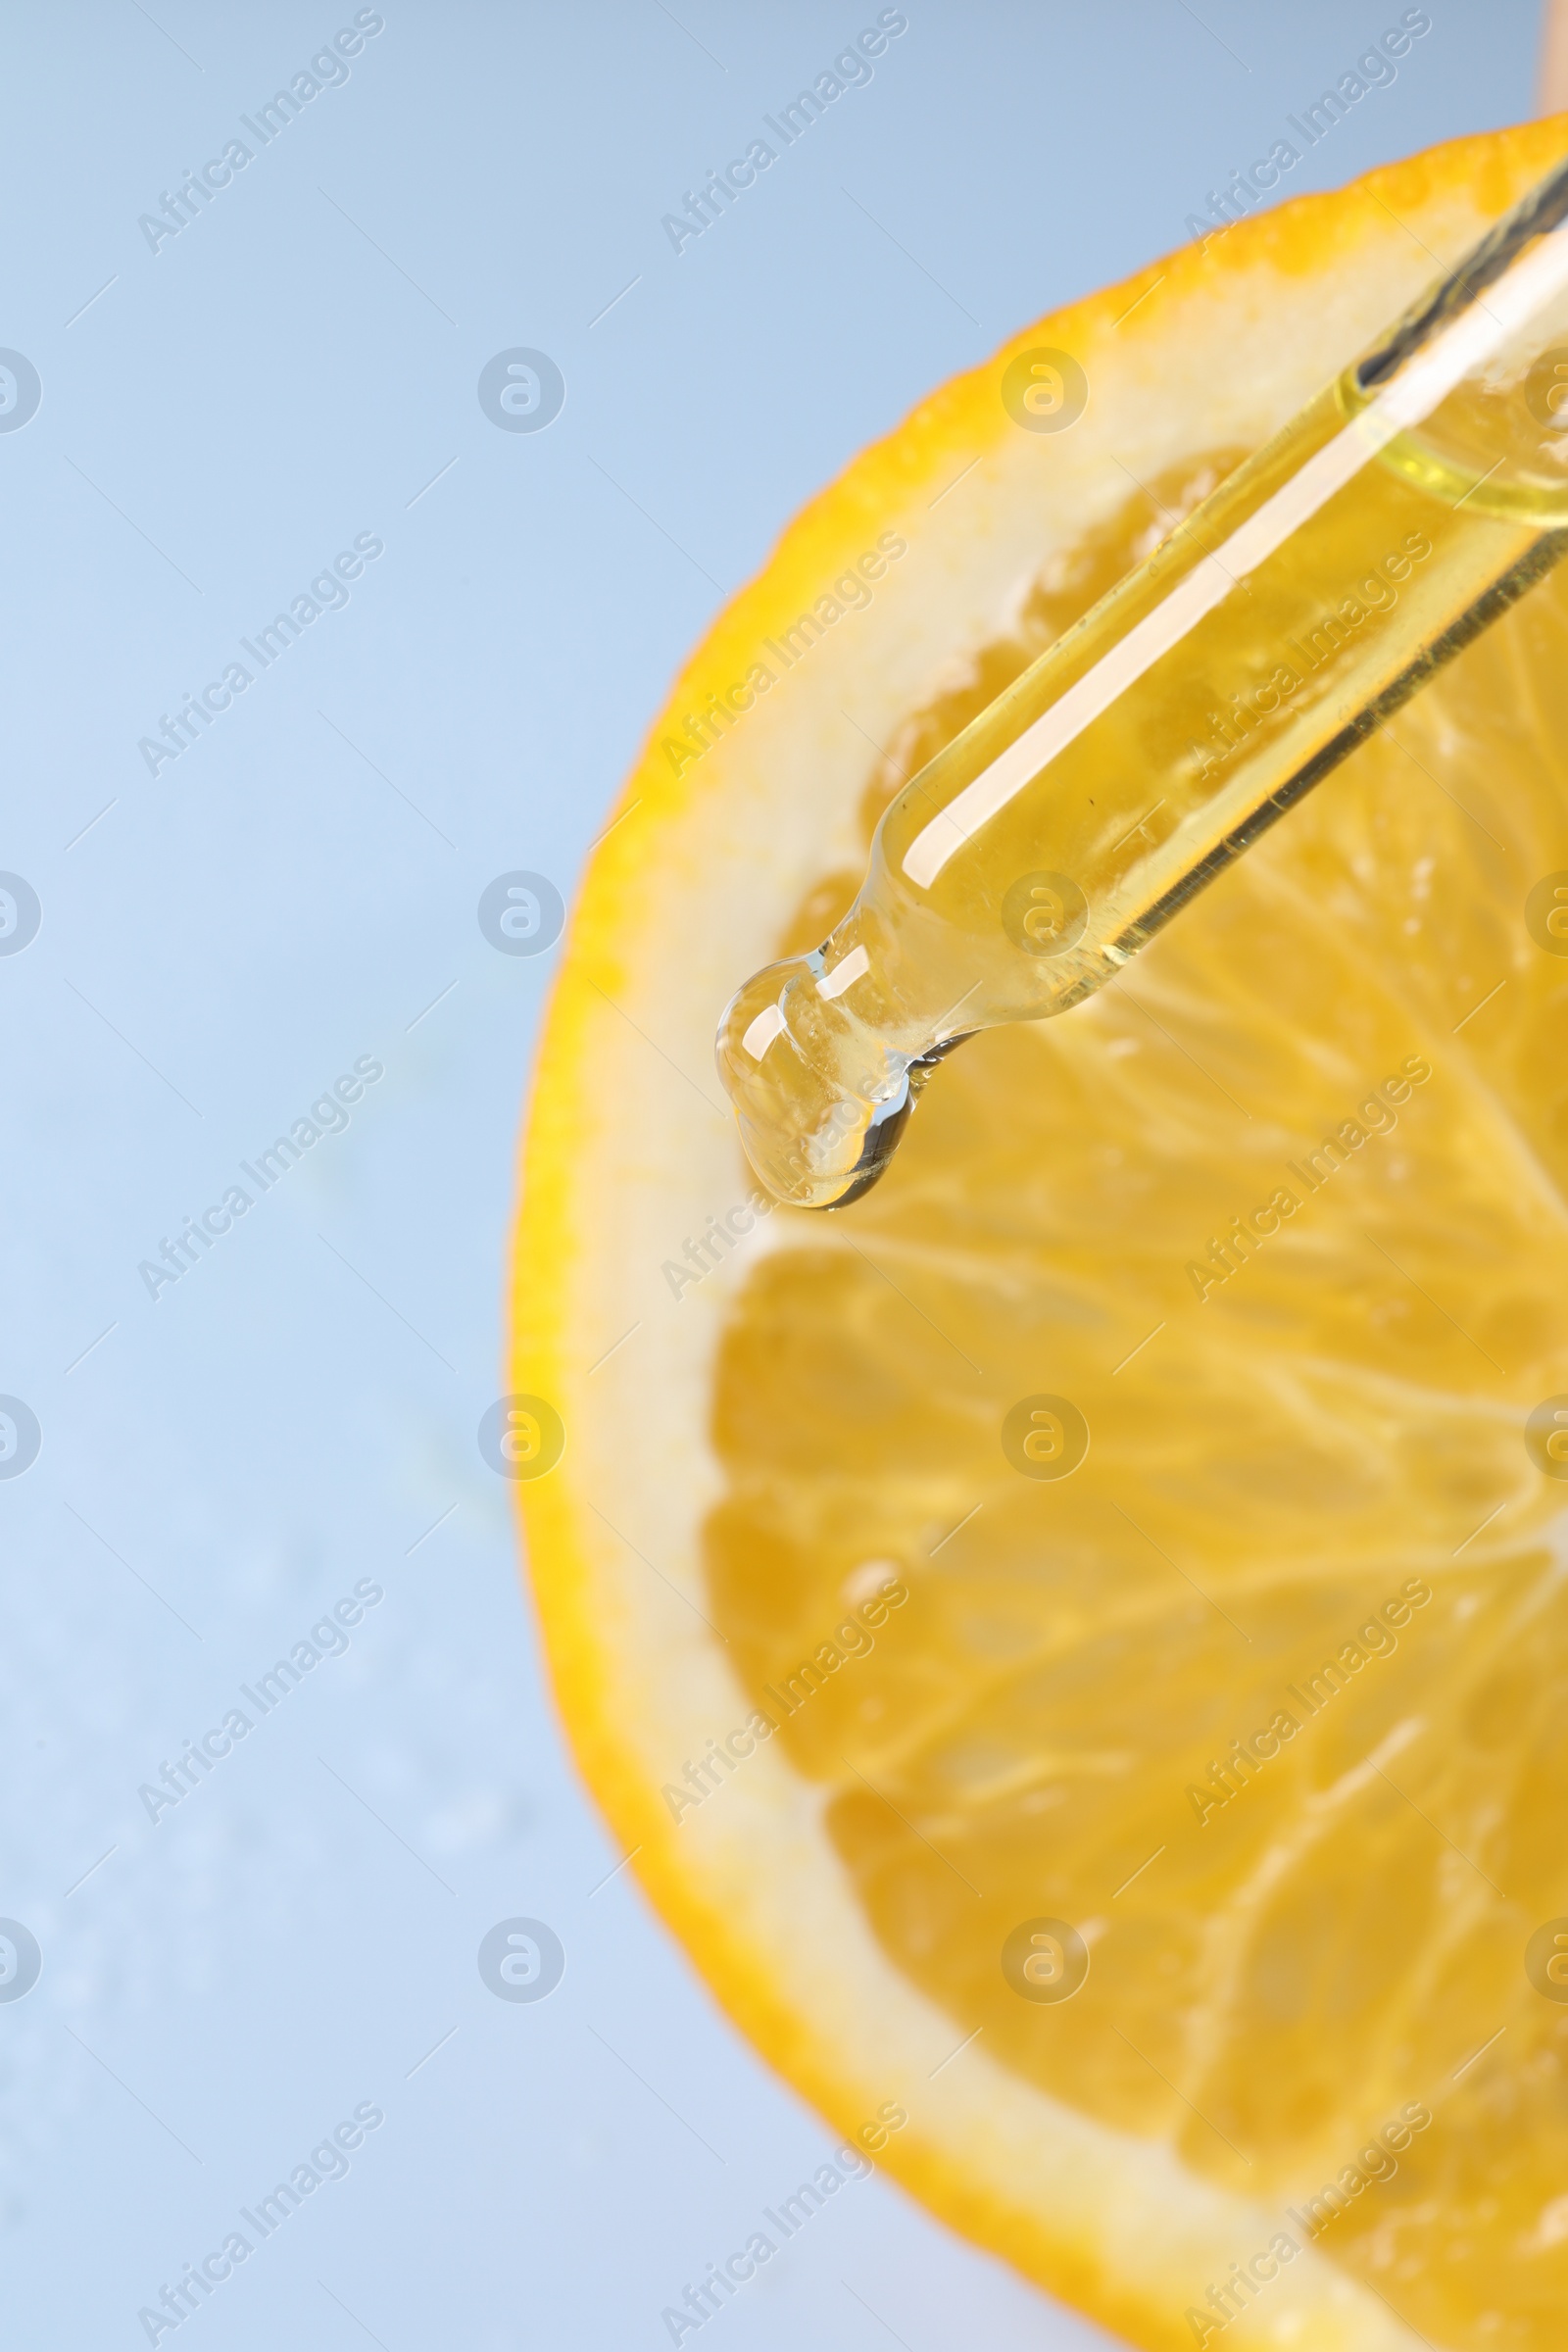 Photo of Dripping cosmetic serum from pipette onto orange slice against light blue background, top view